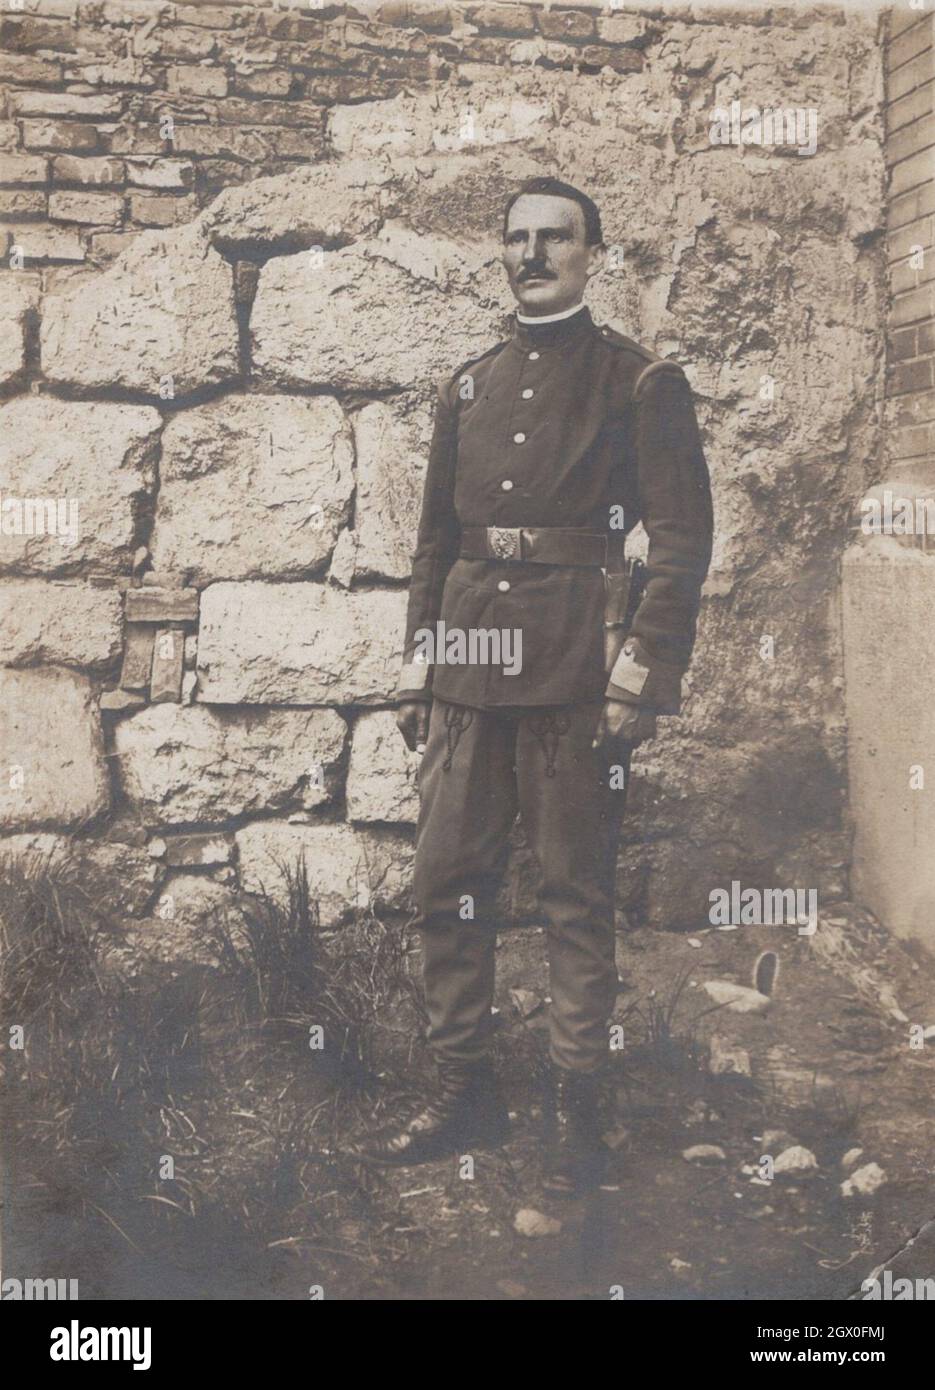 middle aged man posing for the camera in front of a castle at unknown place. This man is police officer or military officer but unrecogniseable that which empire's officer him. He has got black uniform, pistol holster, and a big massive impressive belt buckle. He hes got quite fashonable moustache. Period late 19th century early 20th century. Source: original photograph Stock Photo